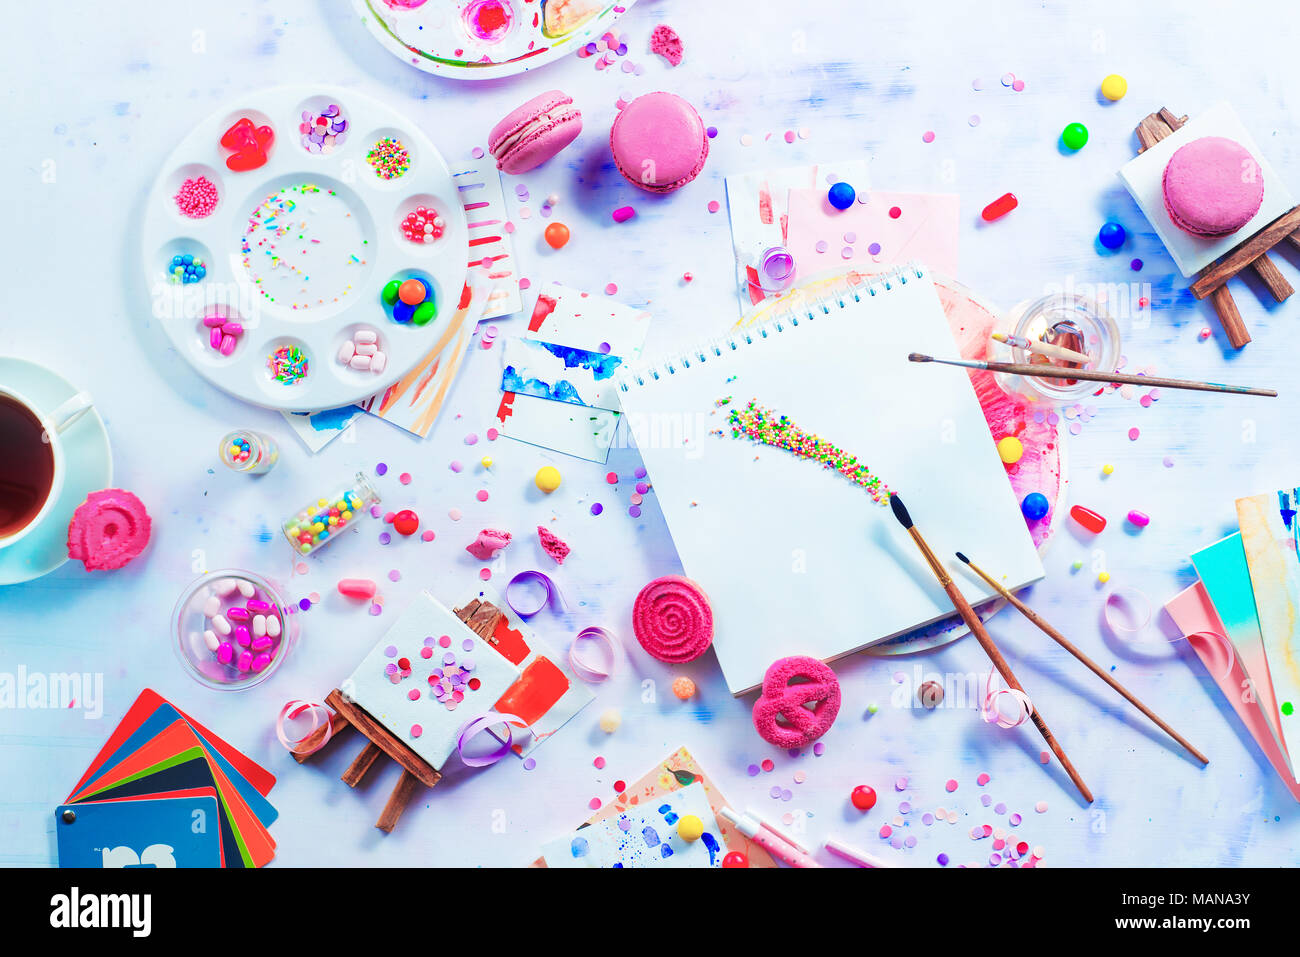 Artist workplace colorful flat lay with sweets, candies and sprinkles. Painting a dessert with a watercolor pallet filled with hard candies. Party con Stock Photo